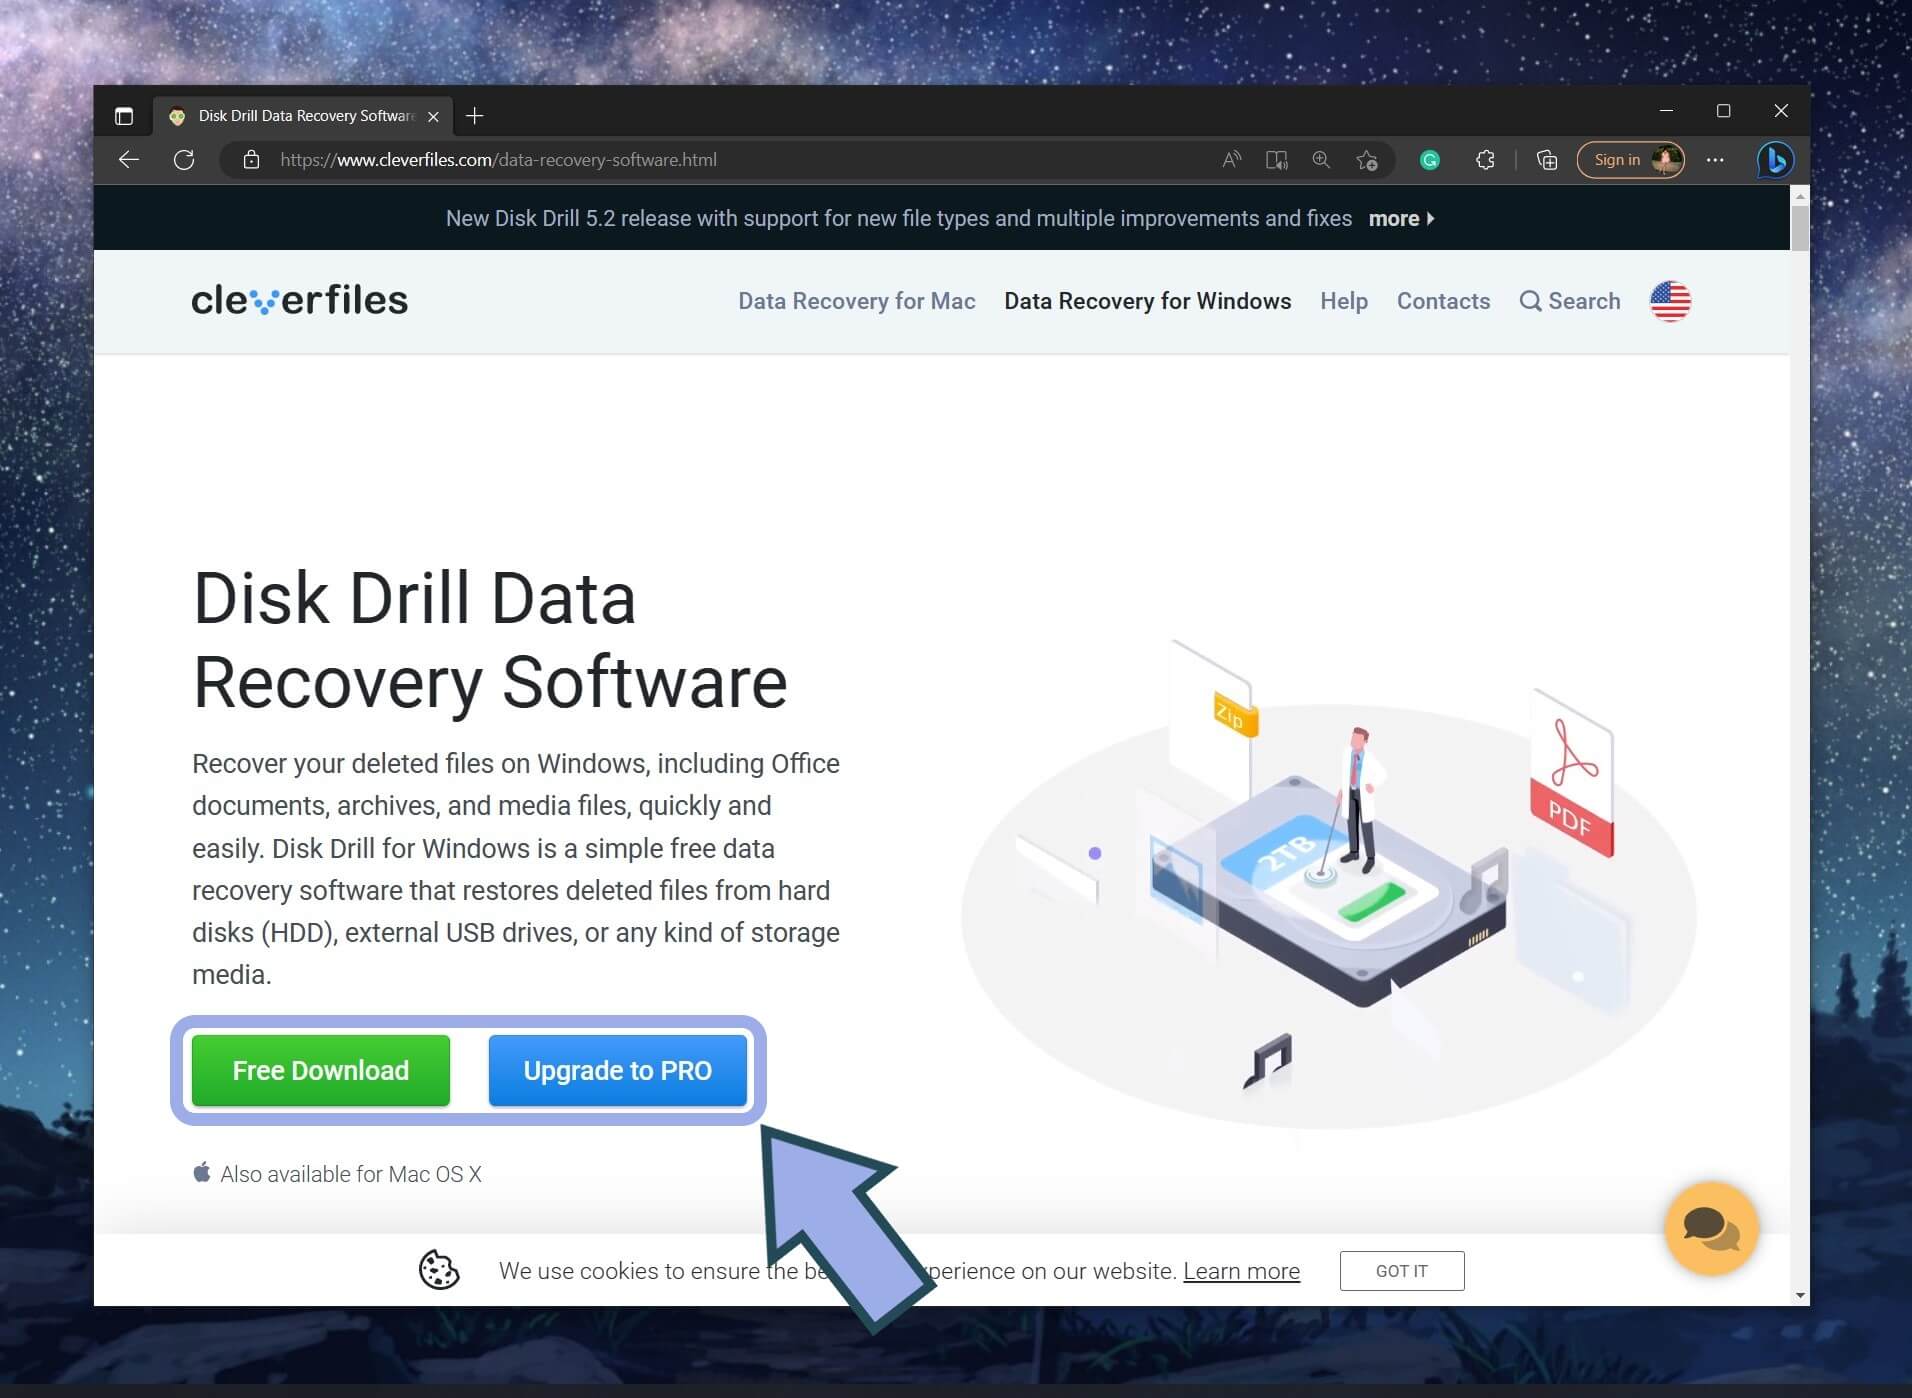 Disk Drill download page for Windows